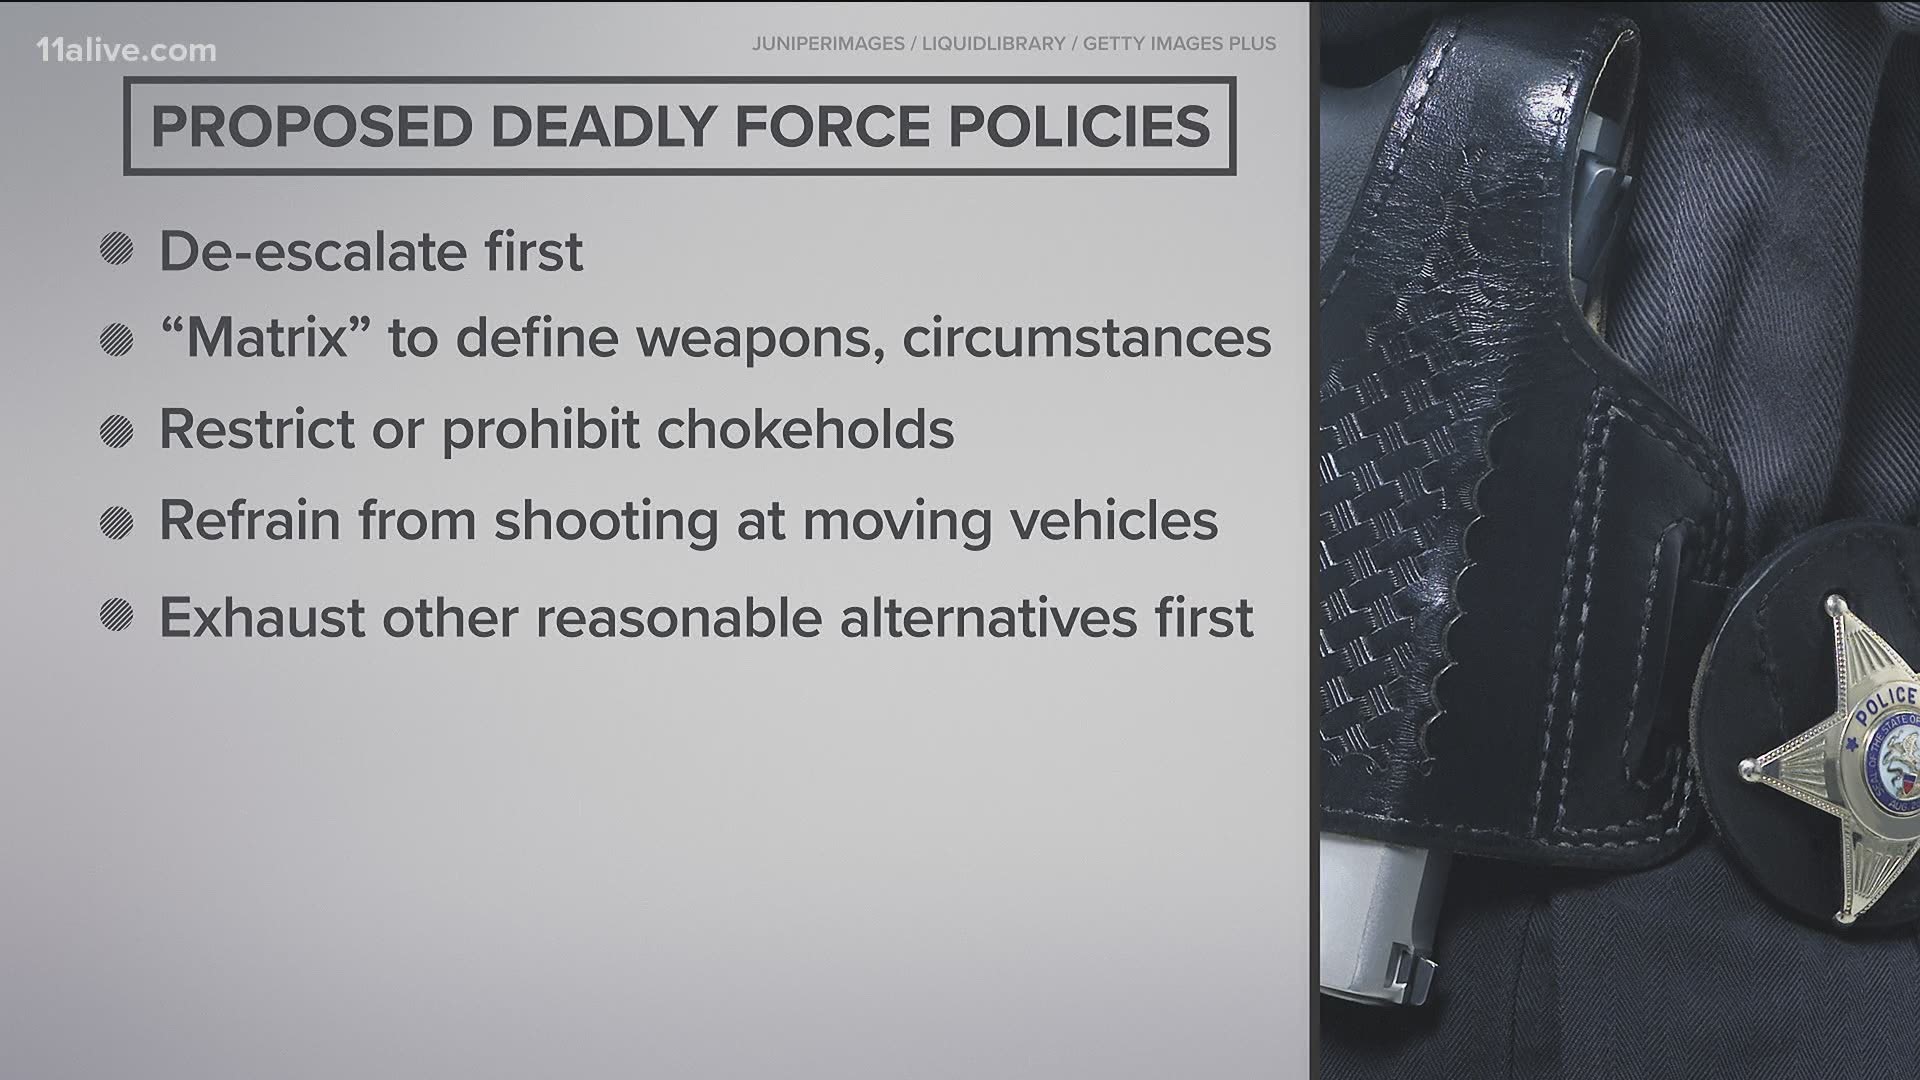 They would require officers to de-escalate situations first when possible